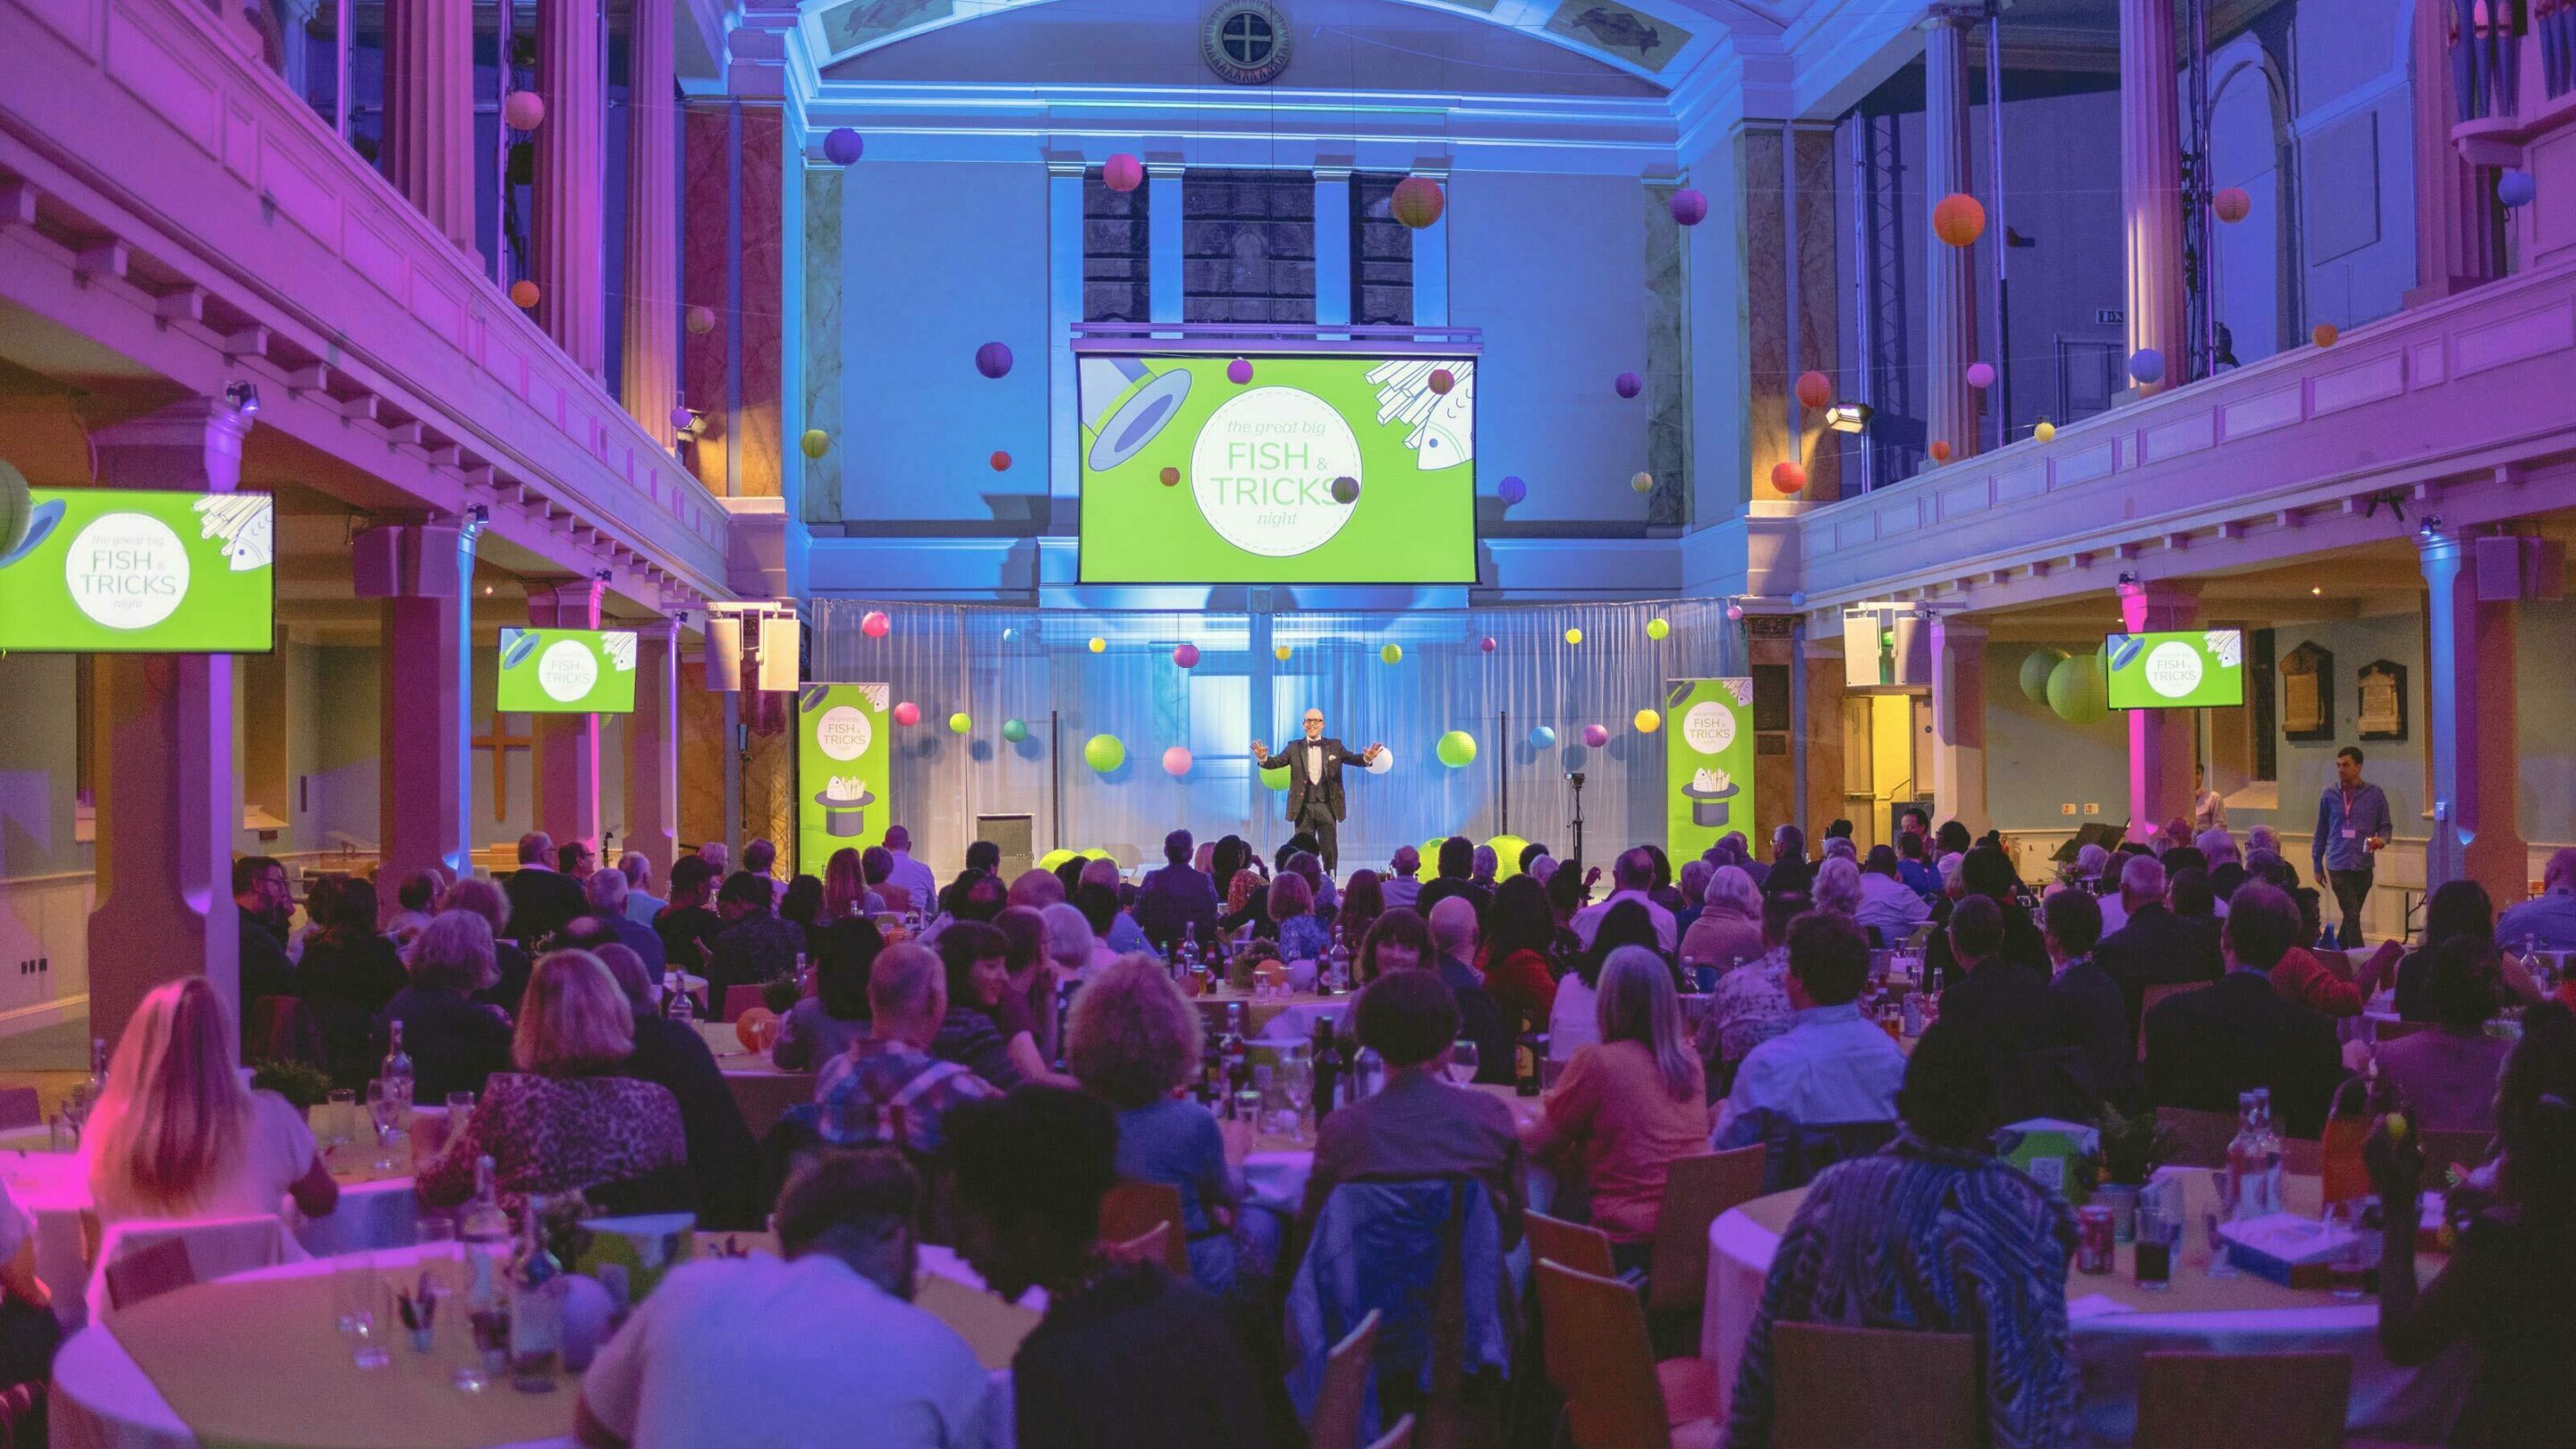 Big conference hall filled with people sat down at tables, purple and blue lights with TV screens presenting 'The great big fish and tricks night'.